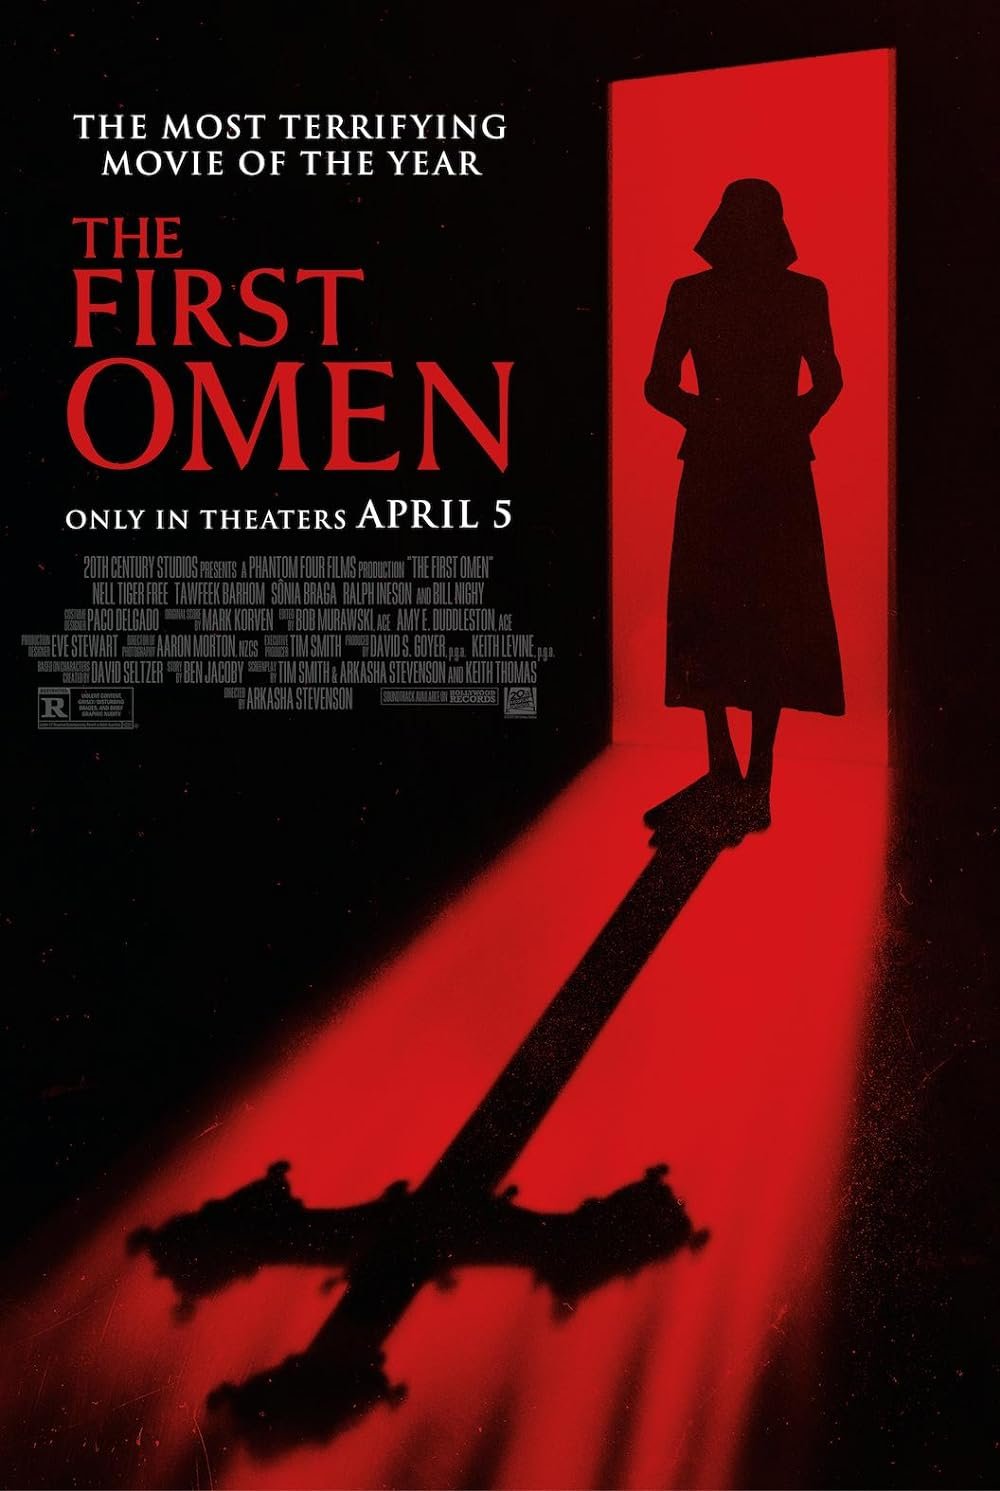 The First Omen images © 20th Century Studios